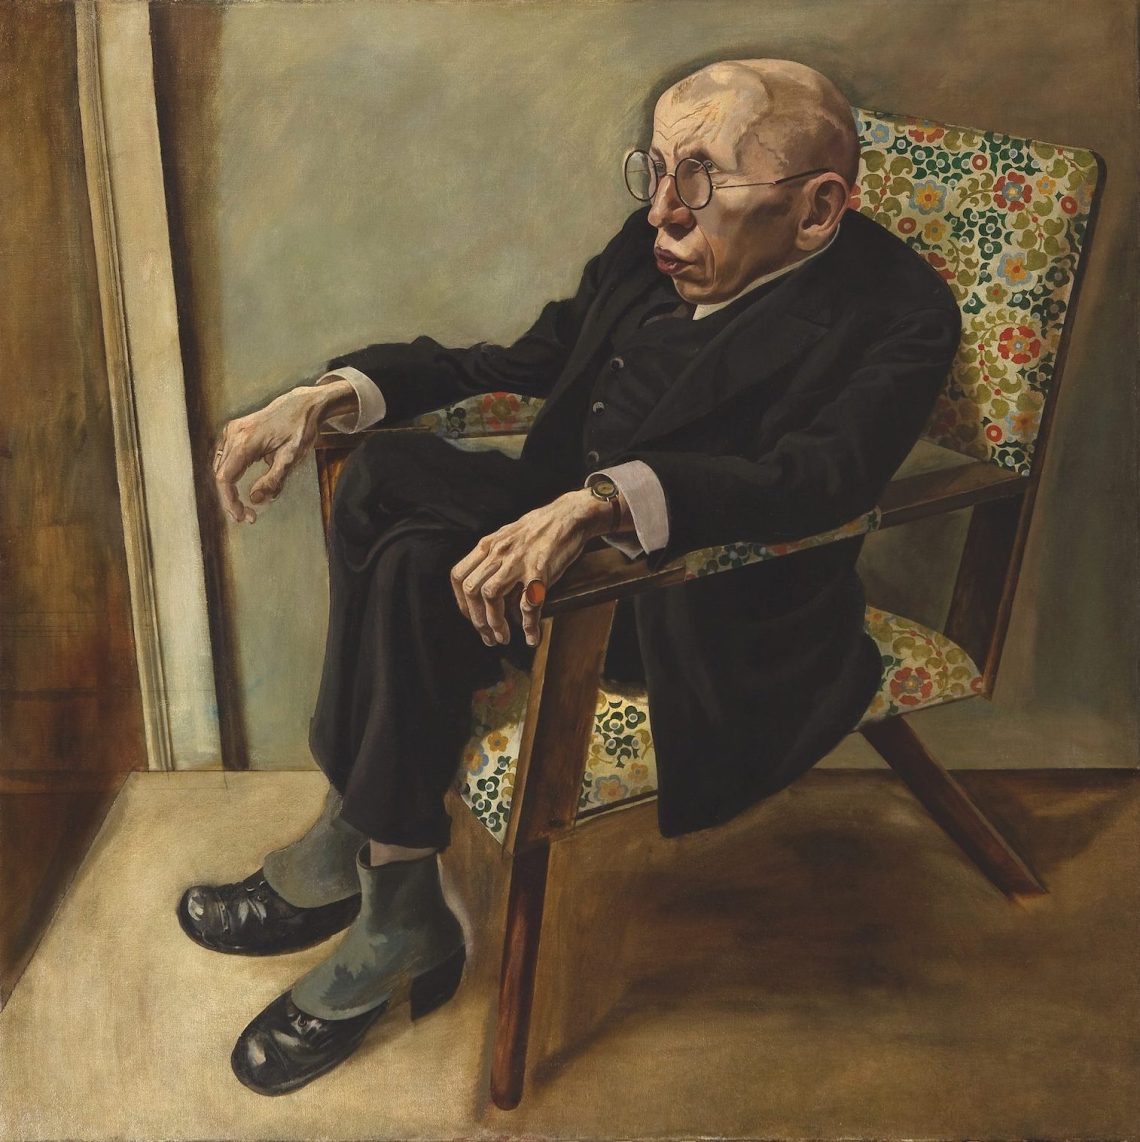 Portrait of an older man sitting in a floral chair